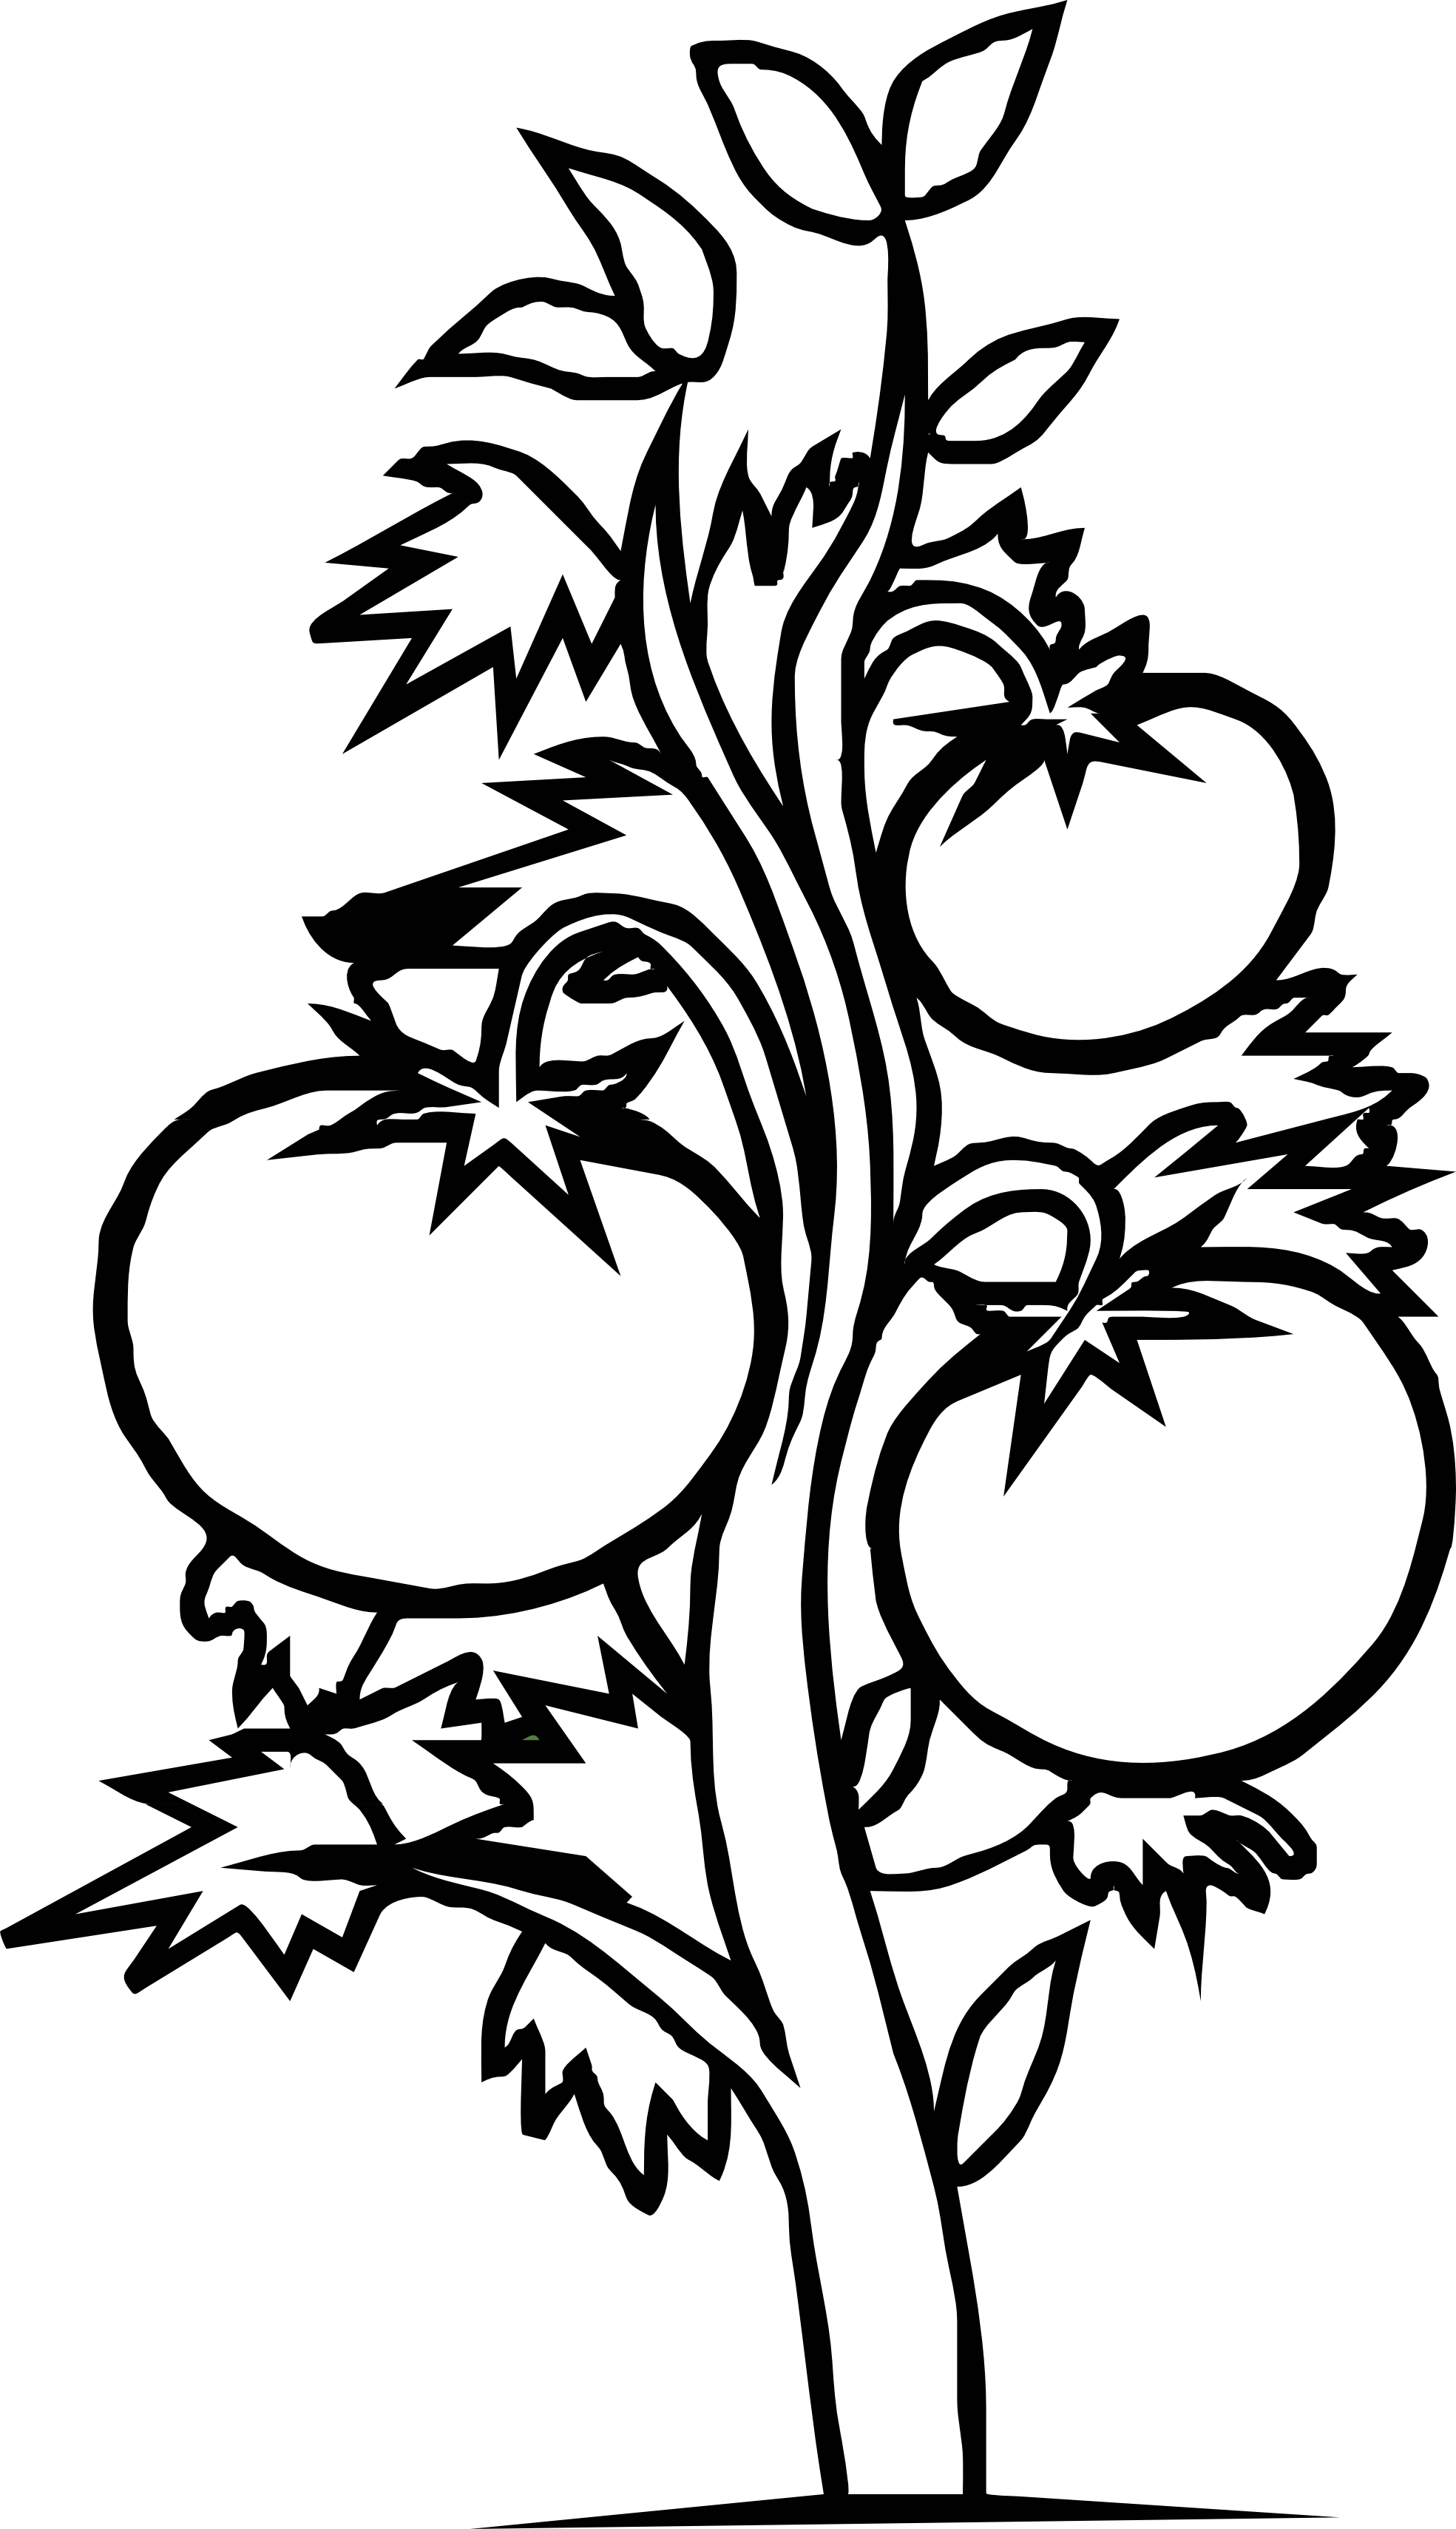 black and white vegetable garden clipart - Clipground